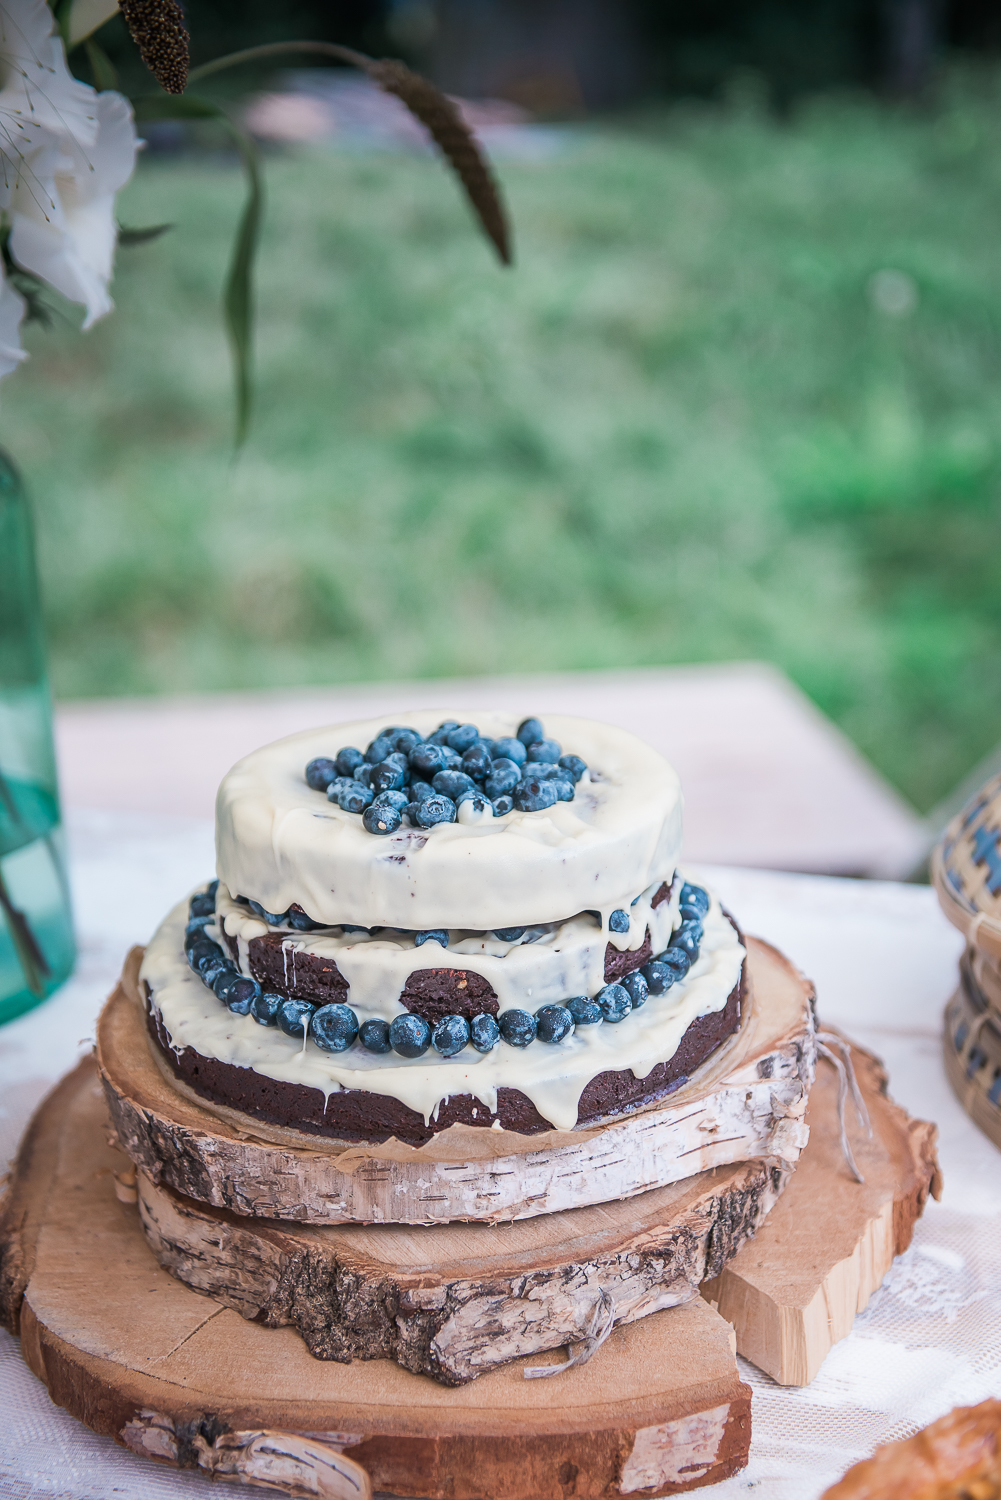 Delicious home made wedding cake with blue berries